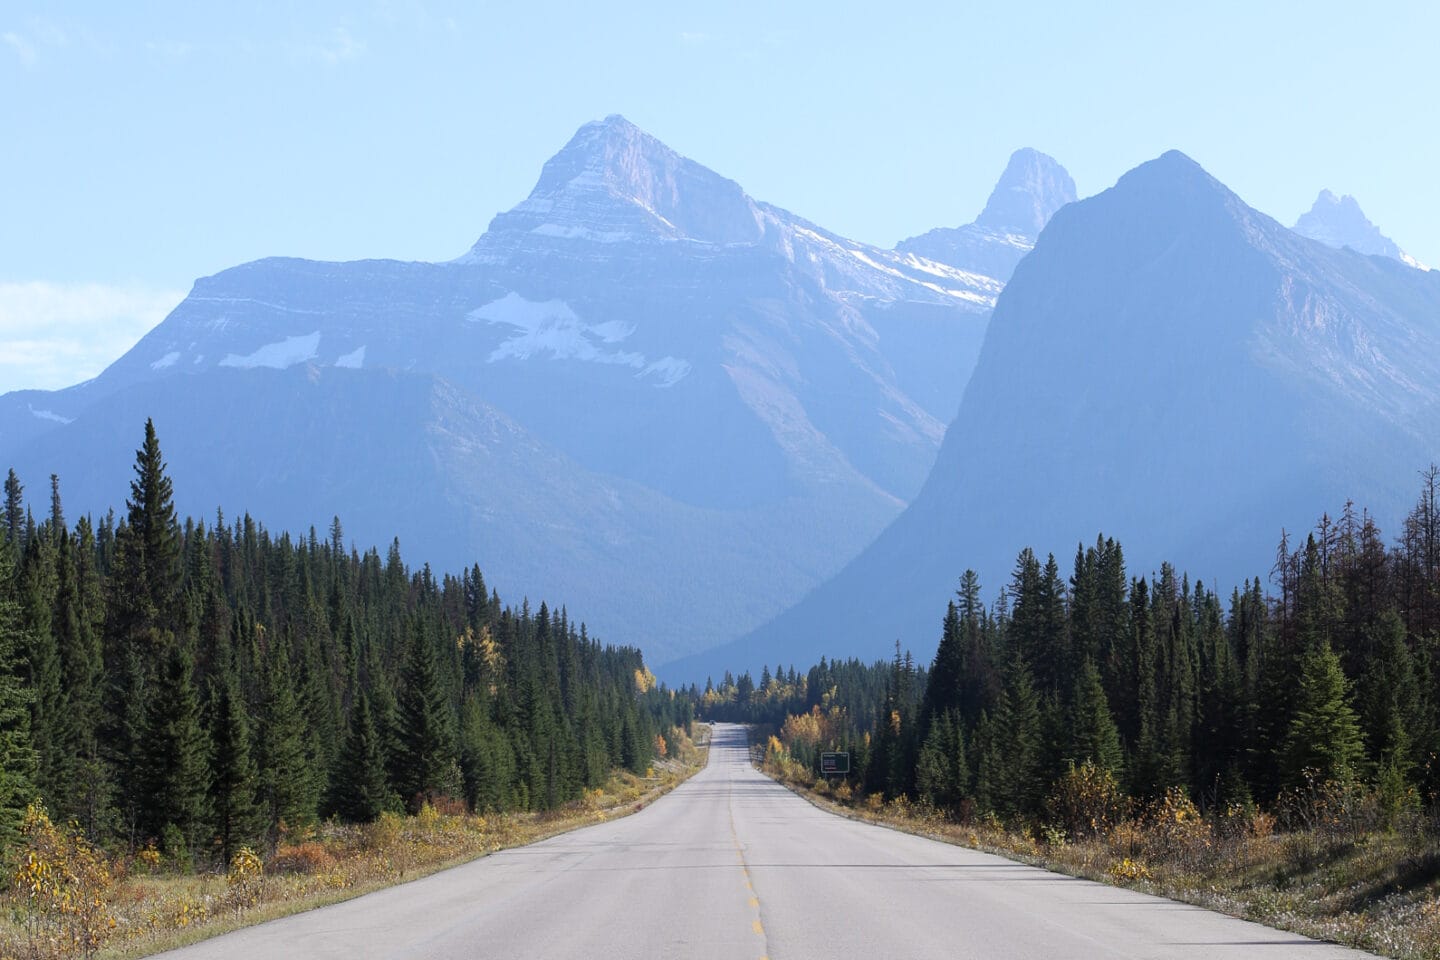 Icefields Parkway Itinerary and Stops